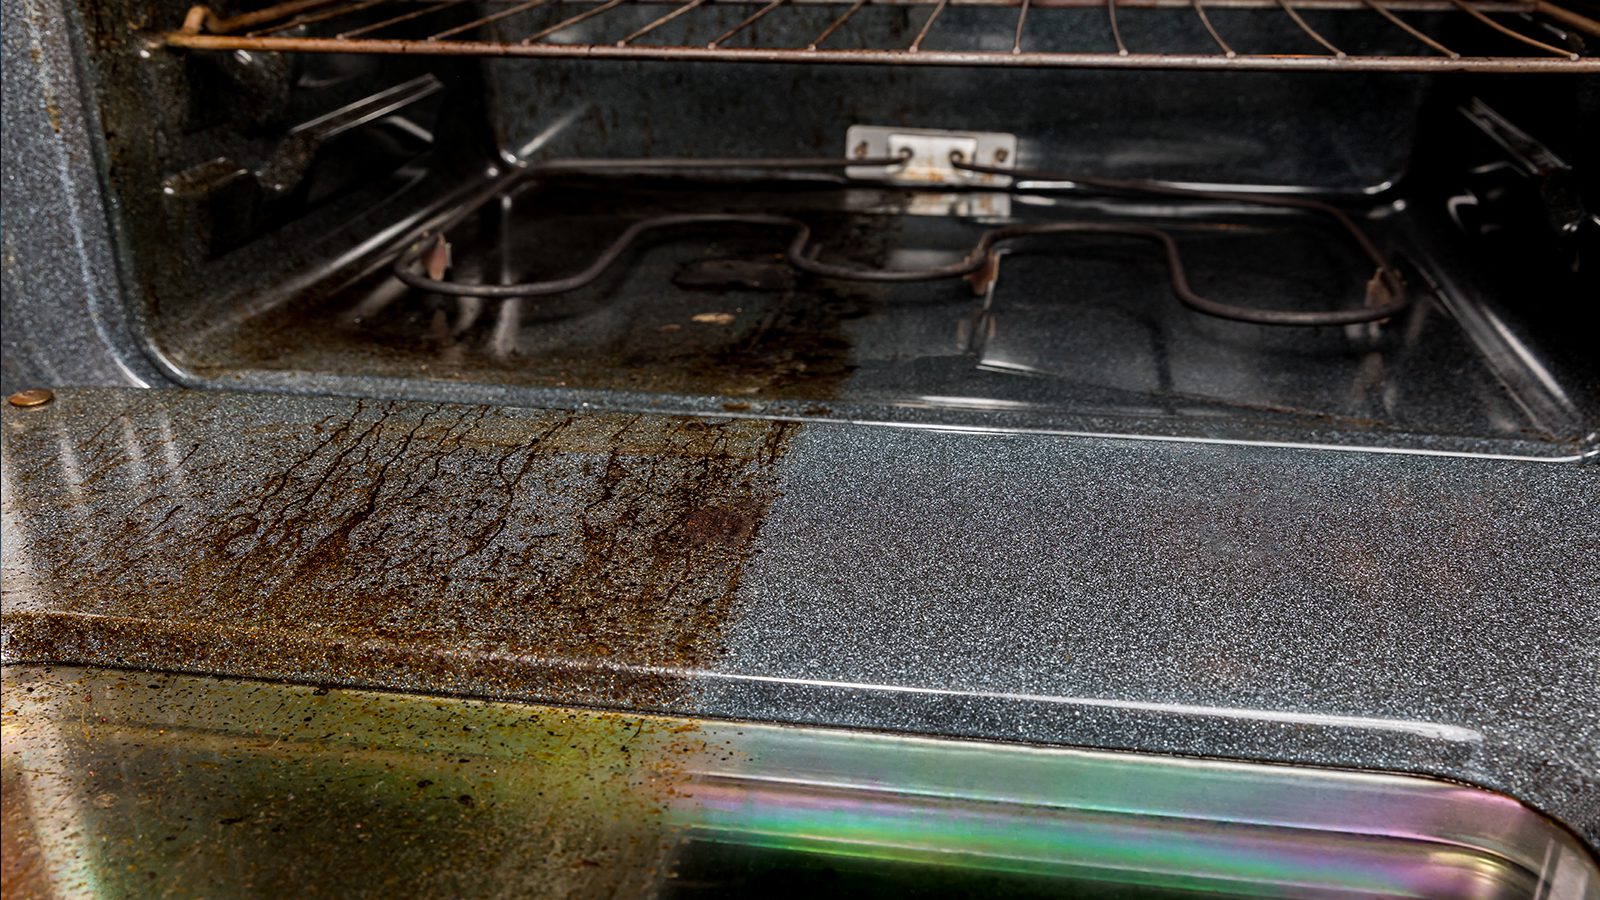 How to Make Homemade Oven Cleaner With No Chemicals